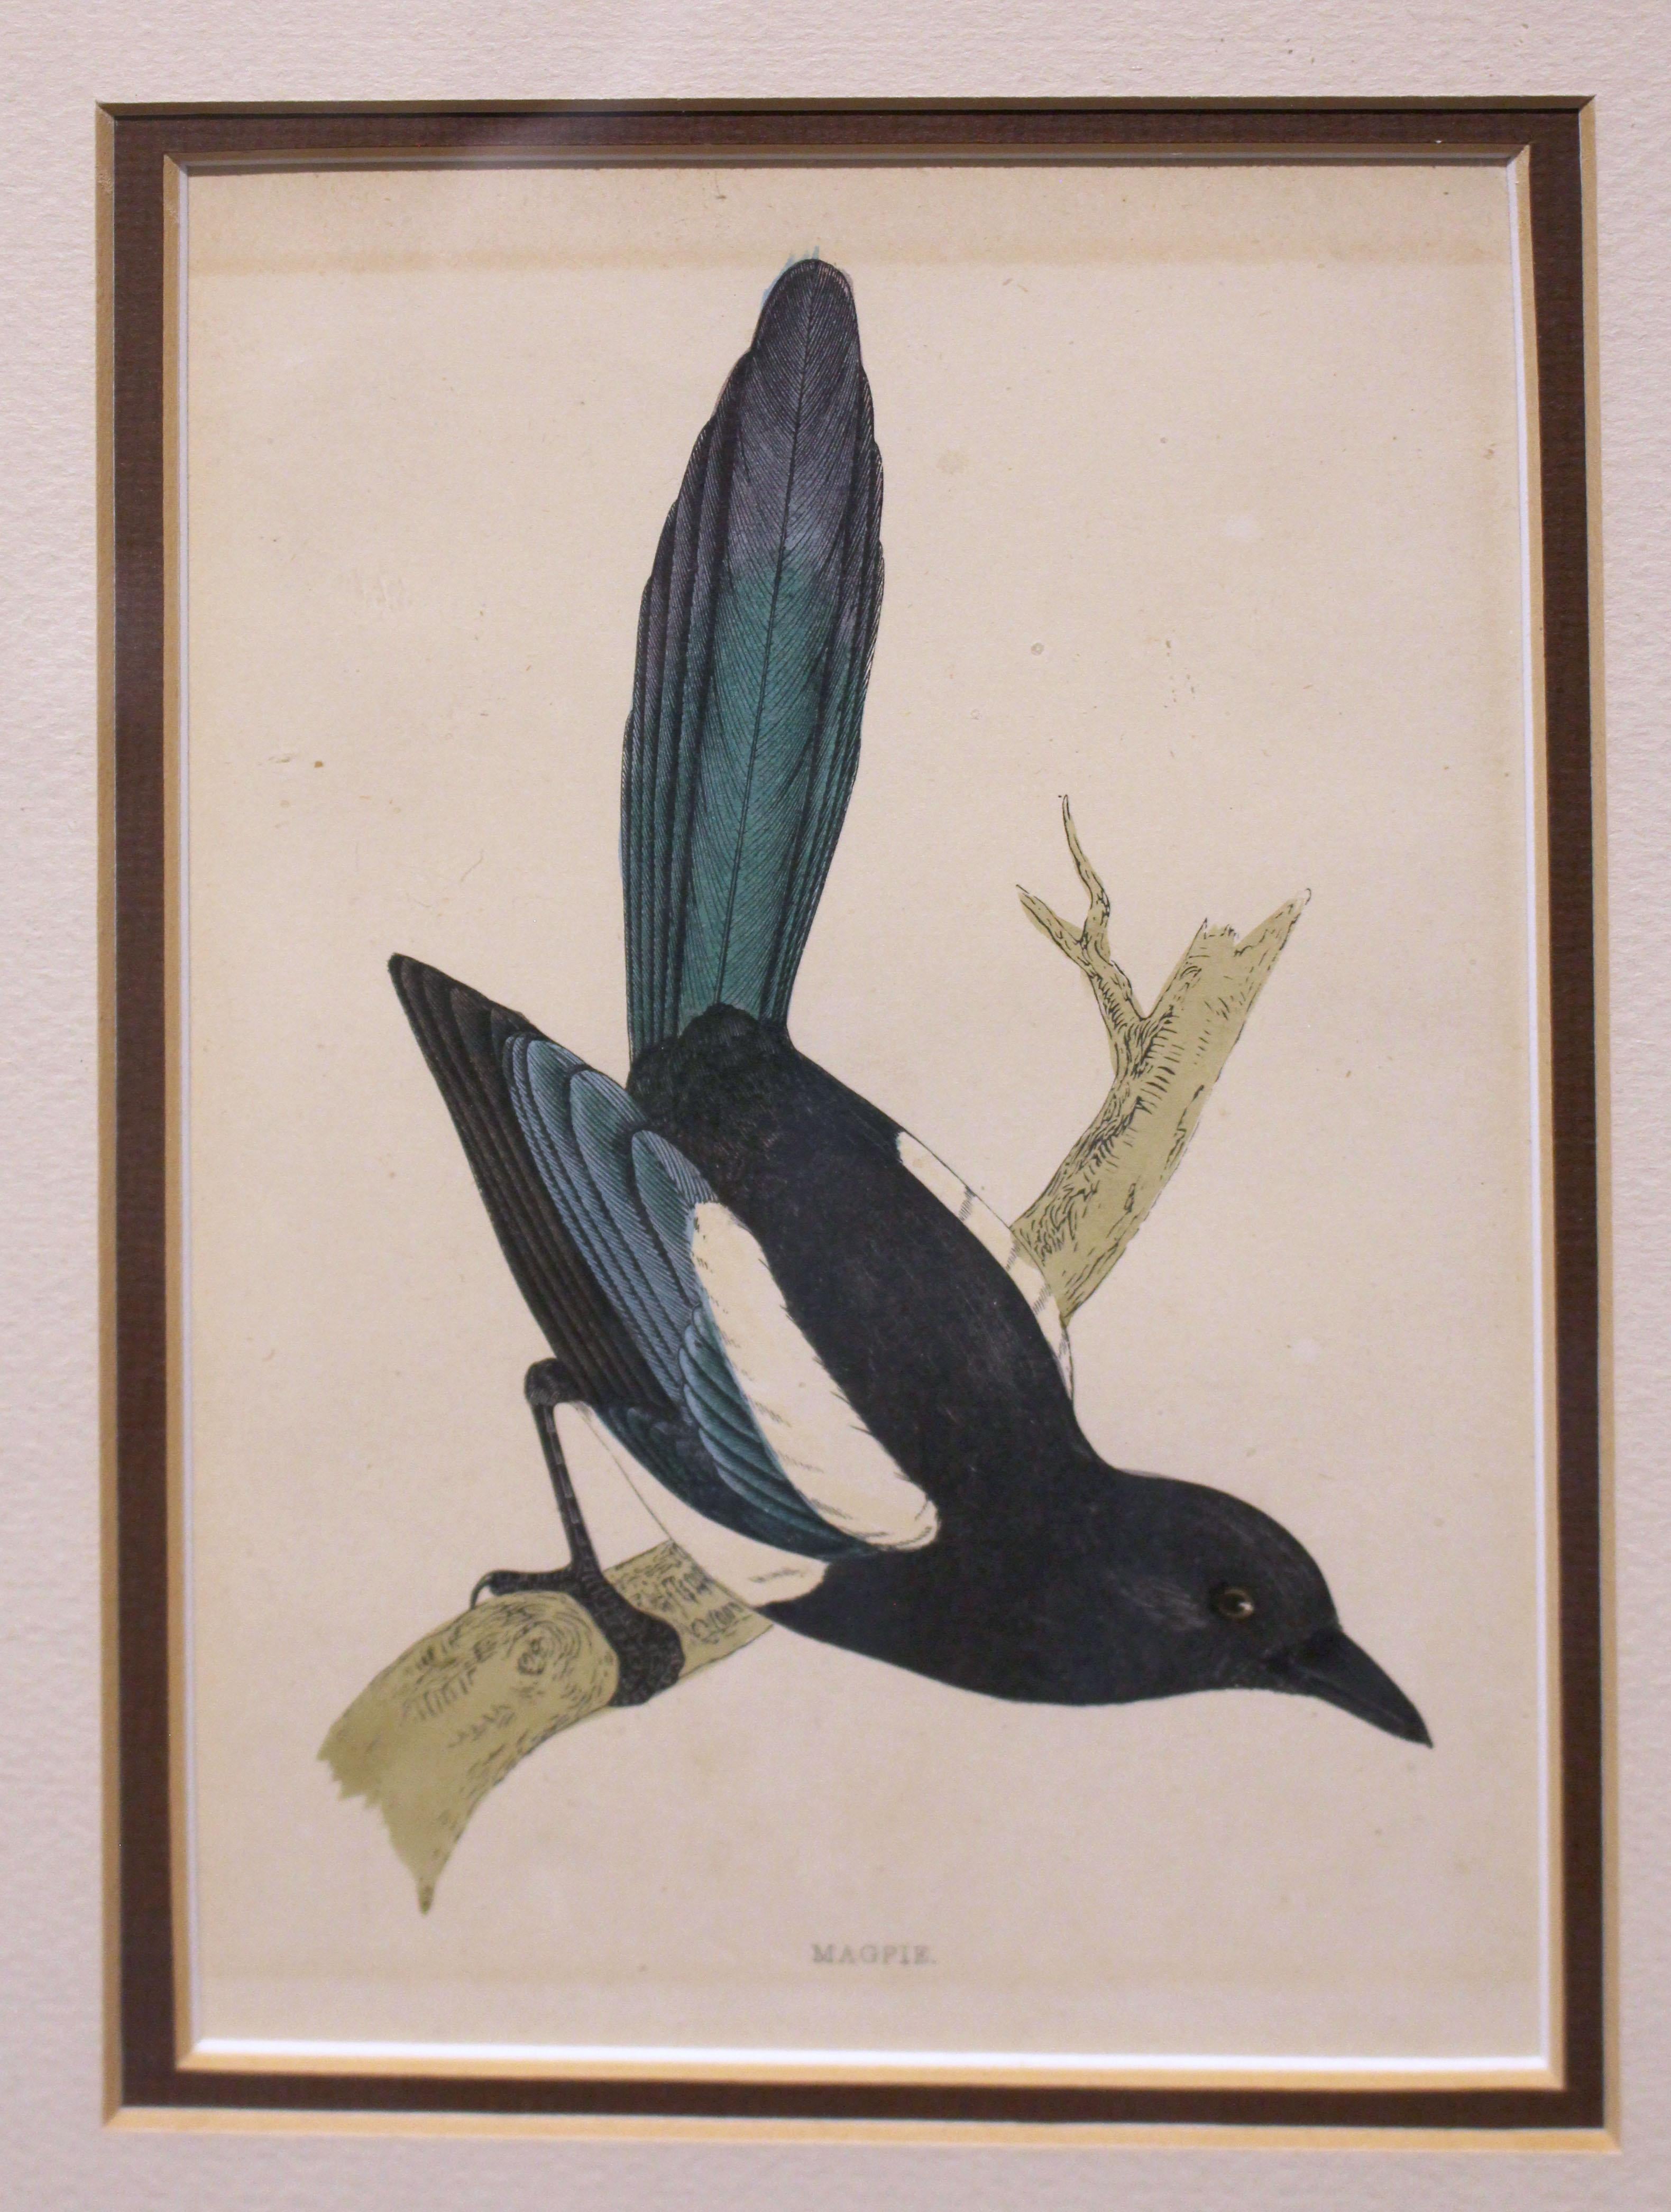 Mid-late 19th century hand-colored lithograph of the 